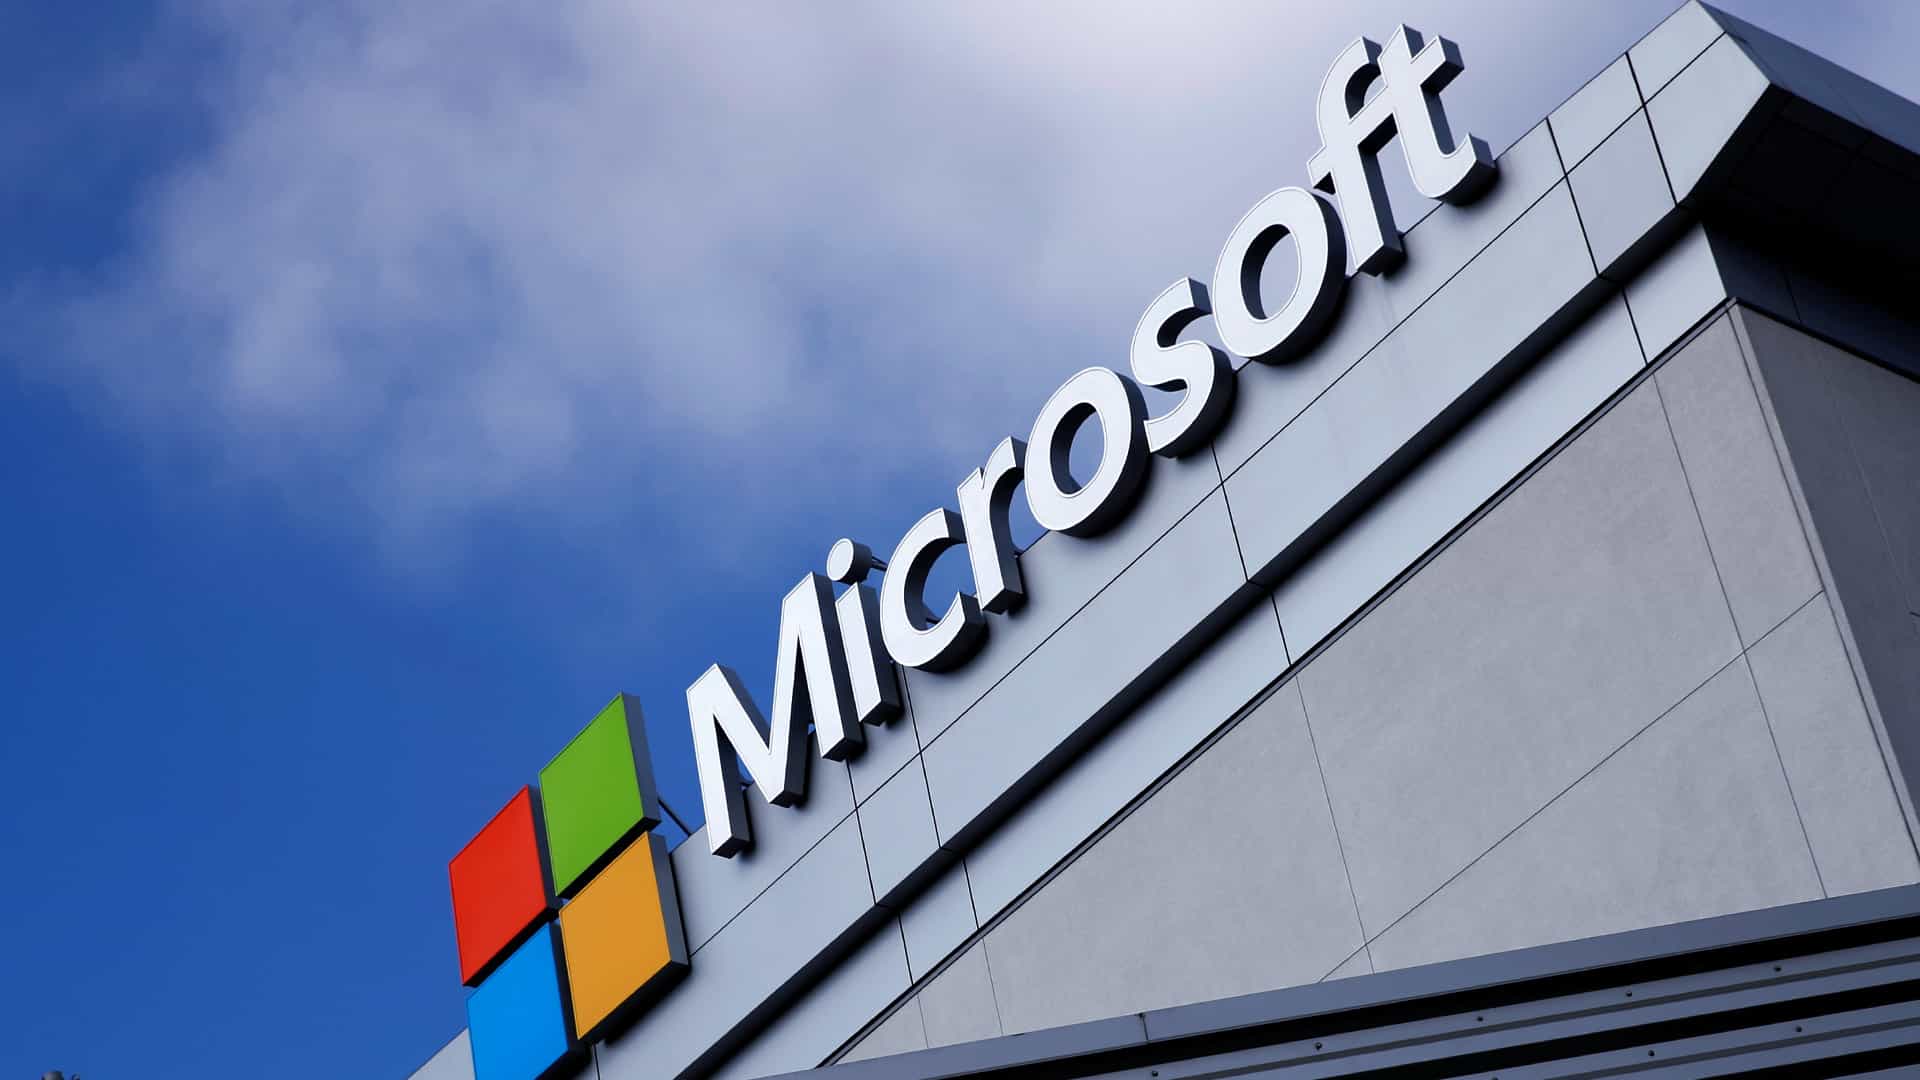 Microsoft supports IWill with 'AI for Accessibility' grant to develop AI CBT mental health program for 615 million Hindi users